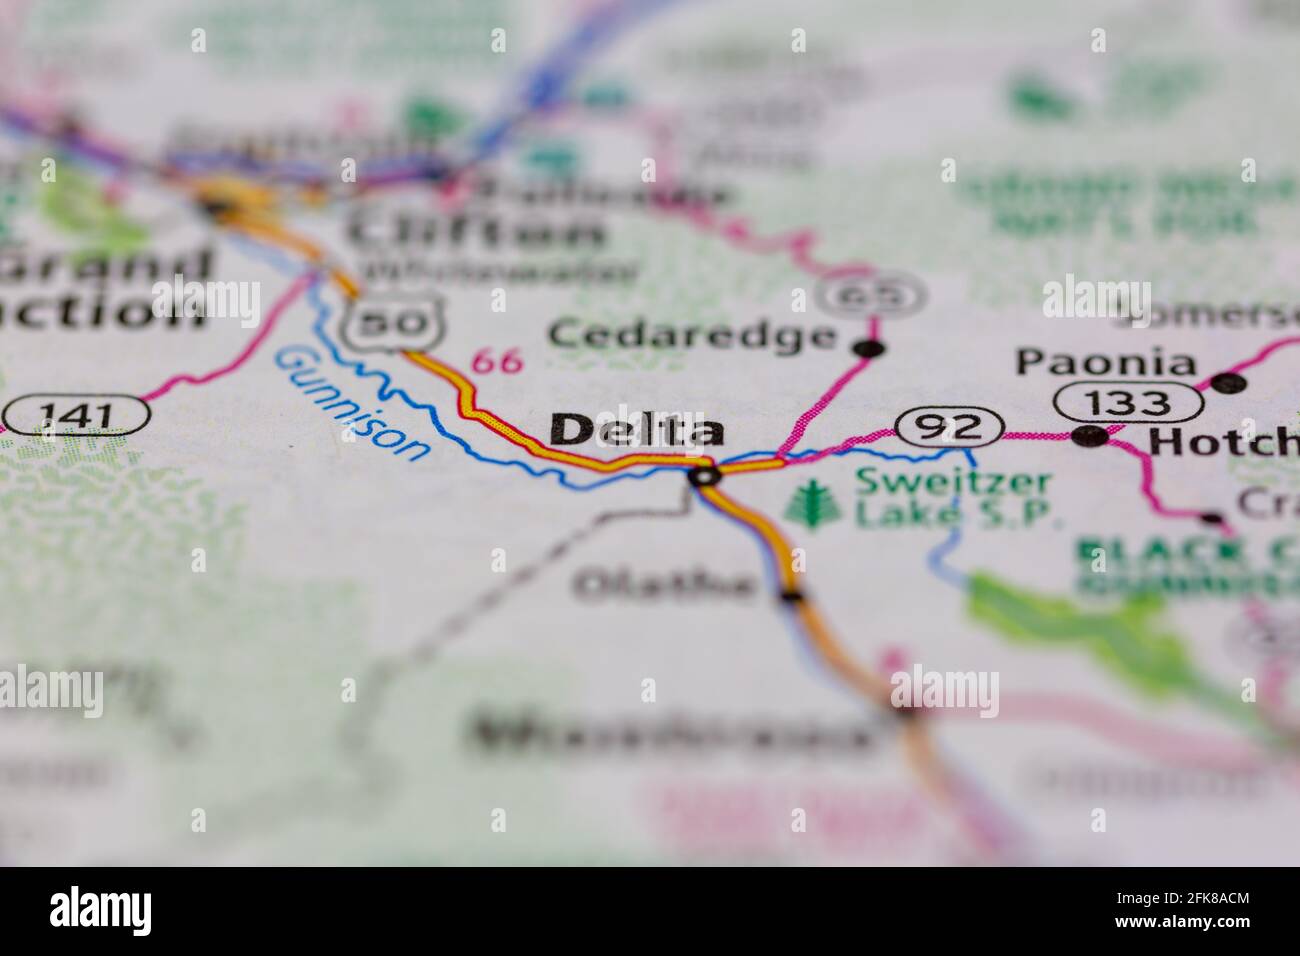 Delta Colorado USA shown on a Geography map or road map Stock Photo